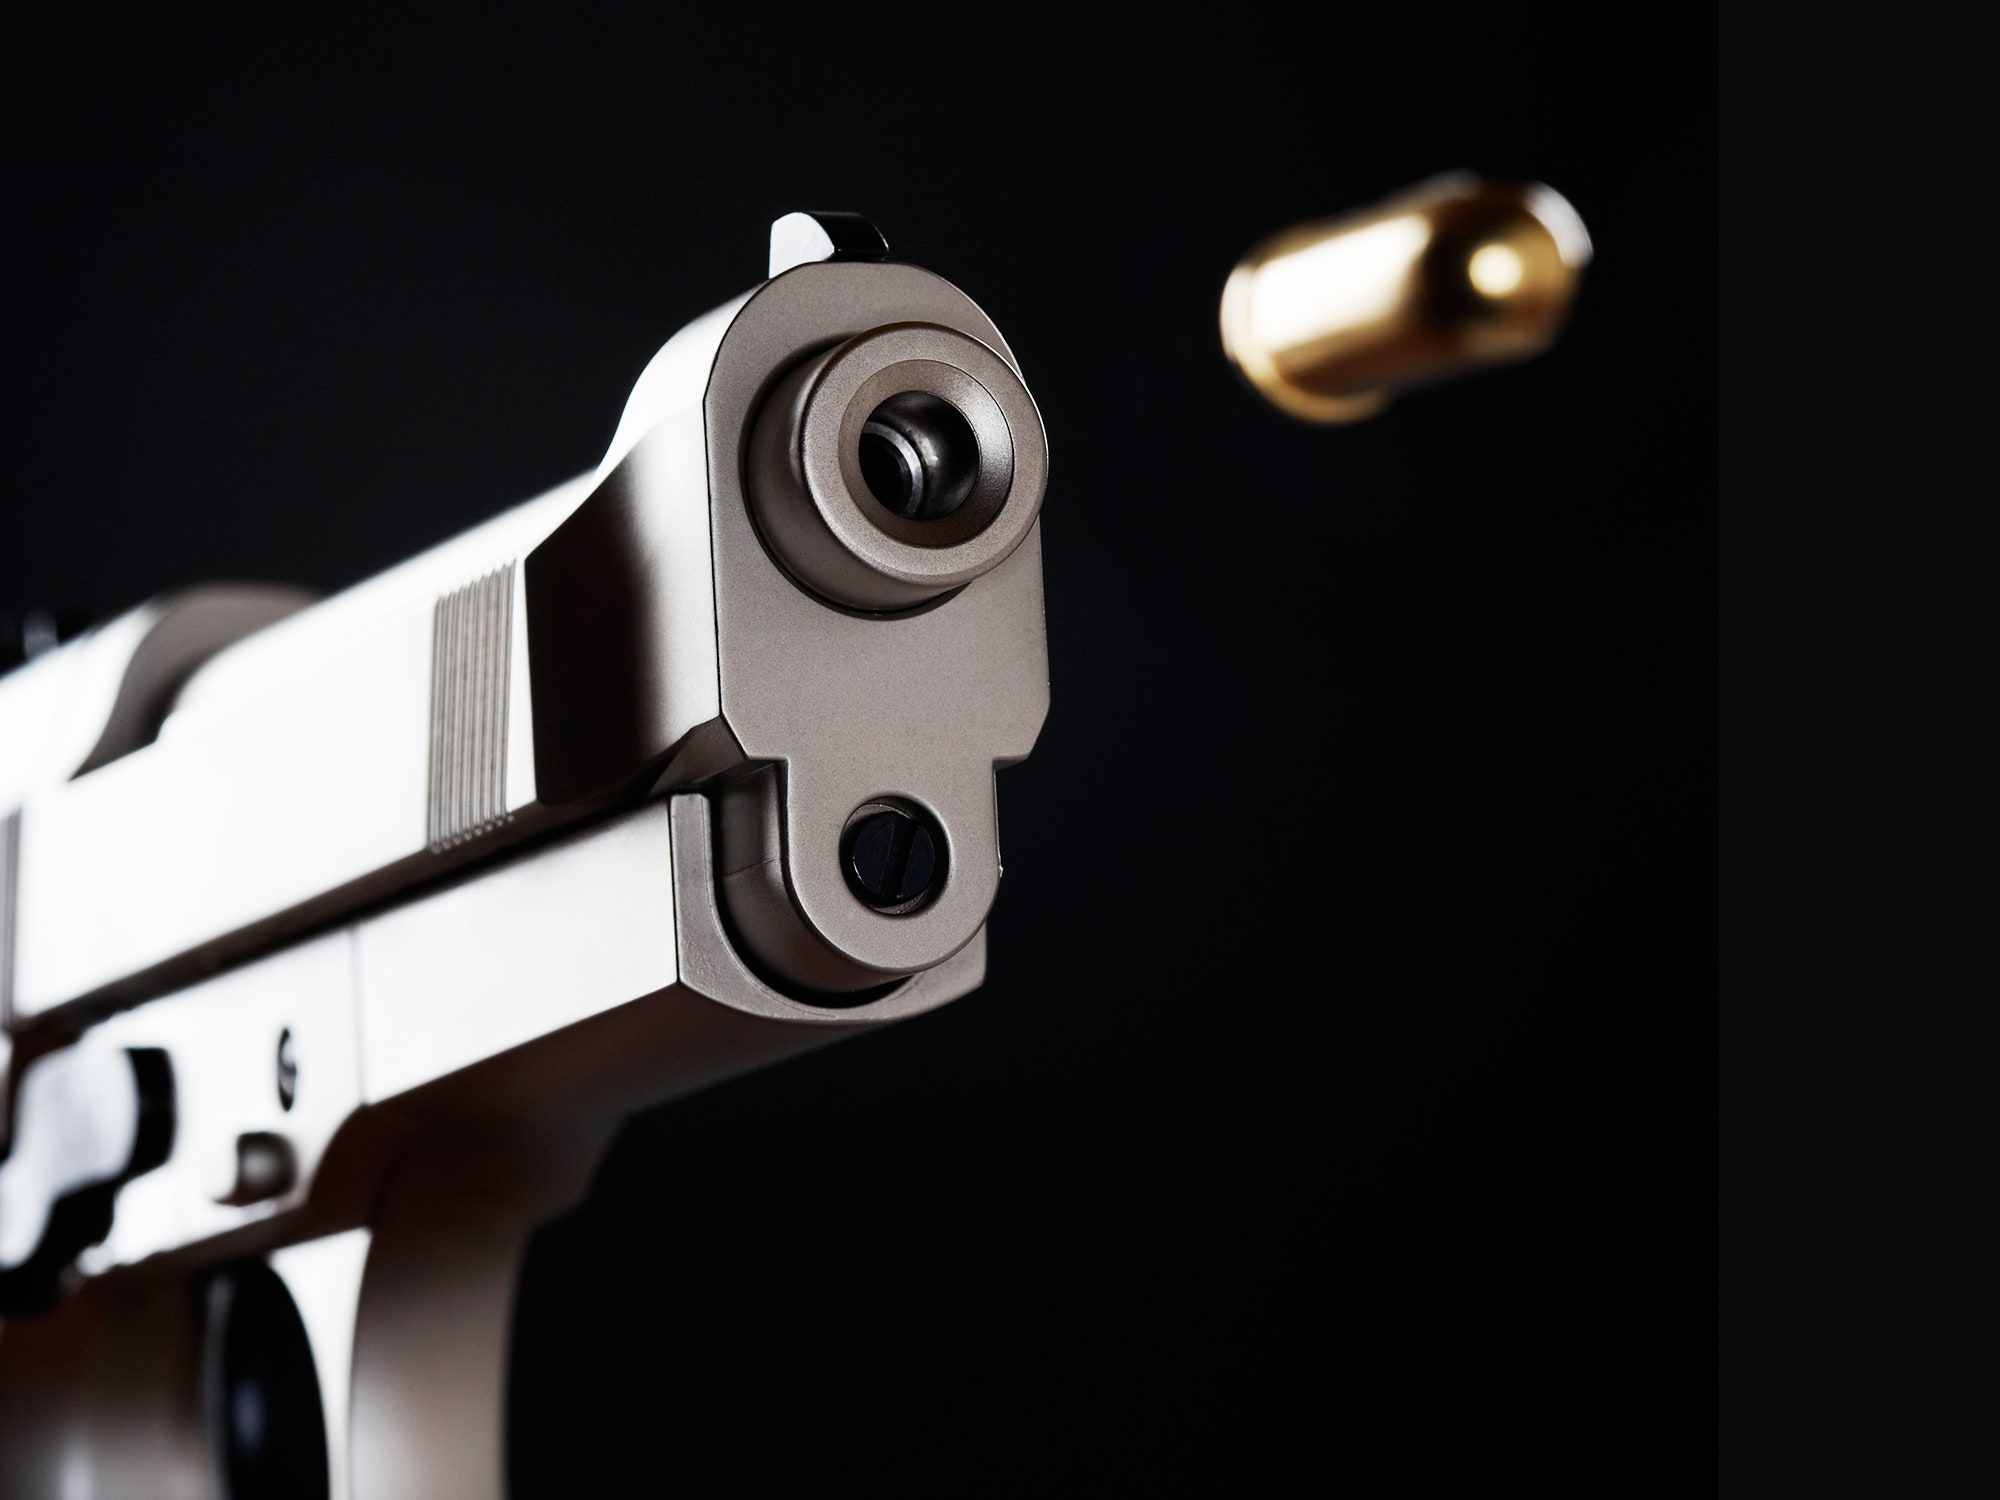 Man allegedly shoots himself in foot during lime in St James